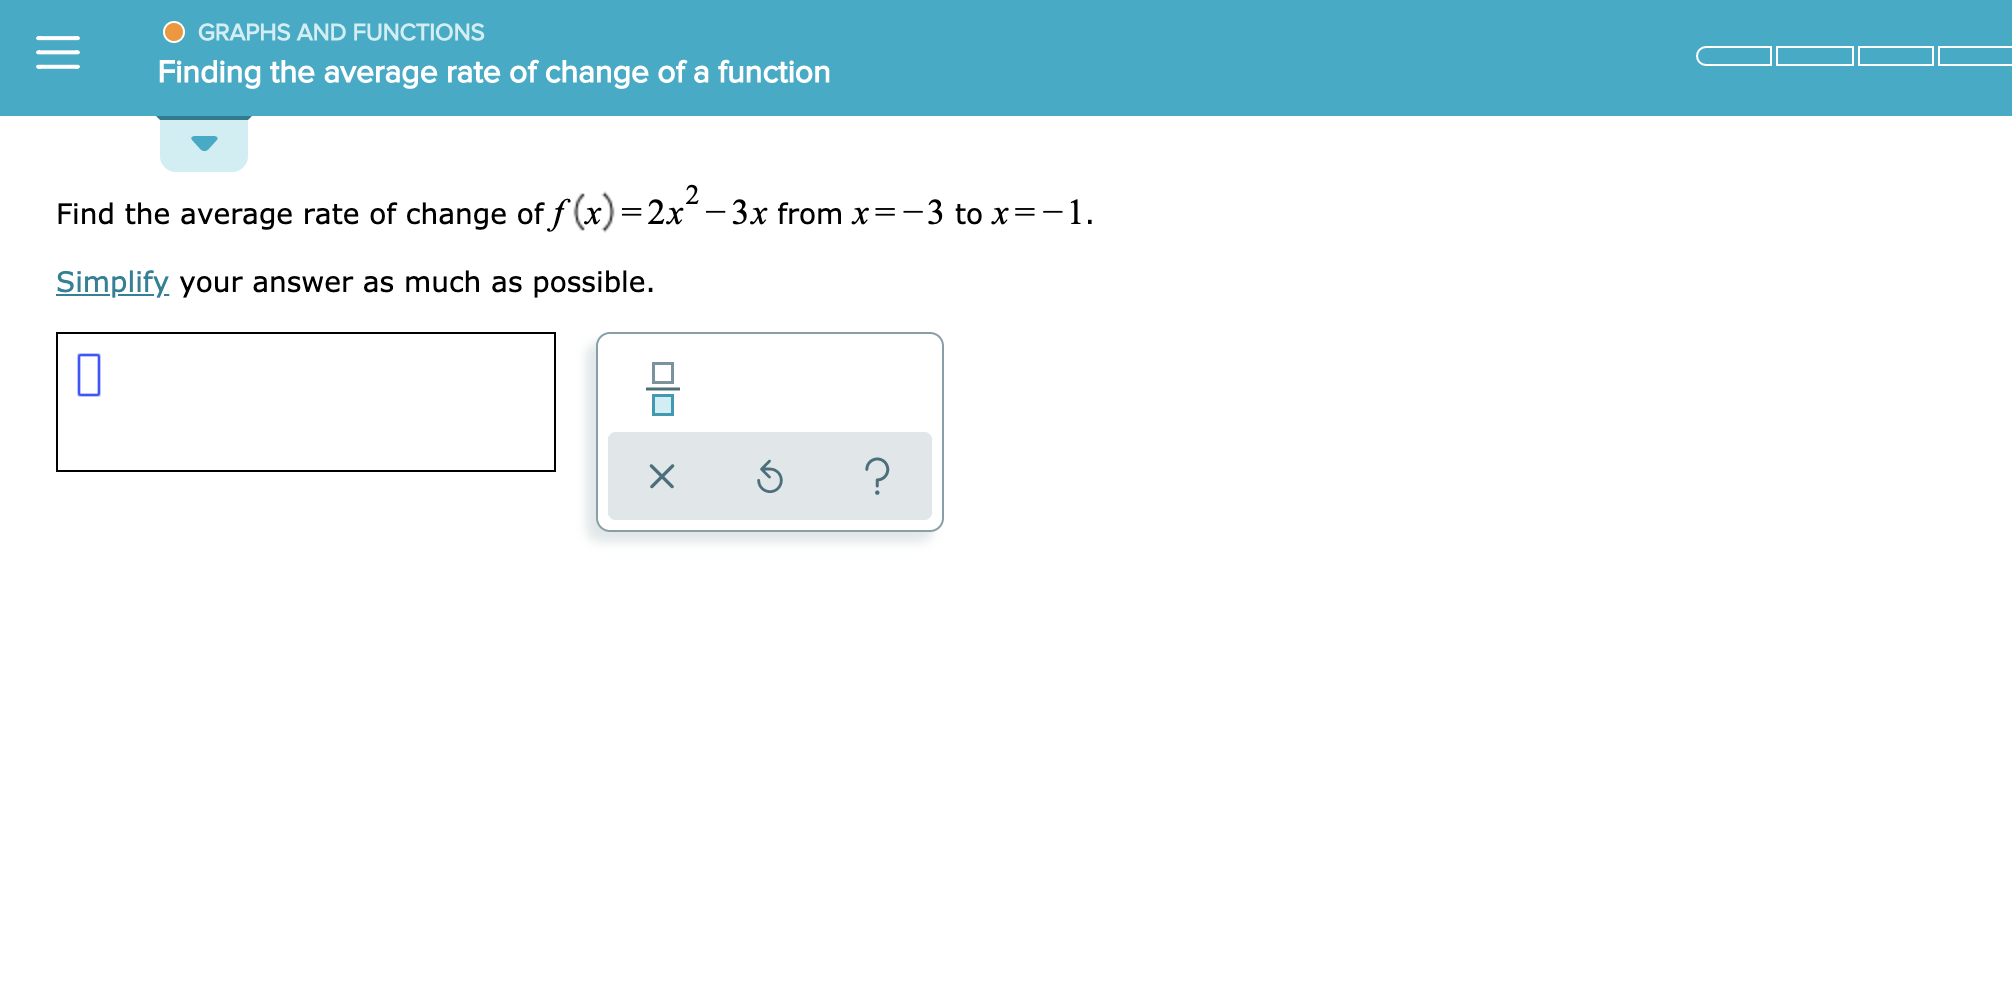 GRAPHS AND FUNCTIONS
Finding the average rate of change of a function
Find the average rate of change of f(x)=2x-3x from x-3 to x=-1
Simplify your answer as much as possible.
?
X
